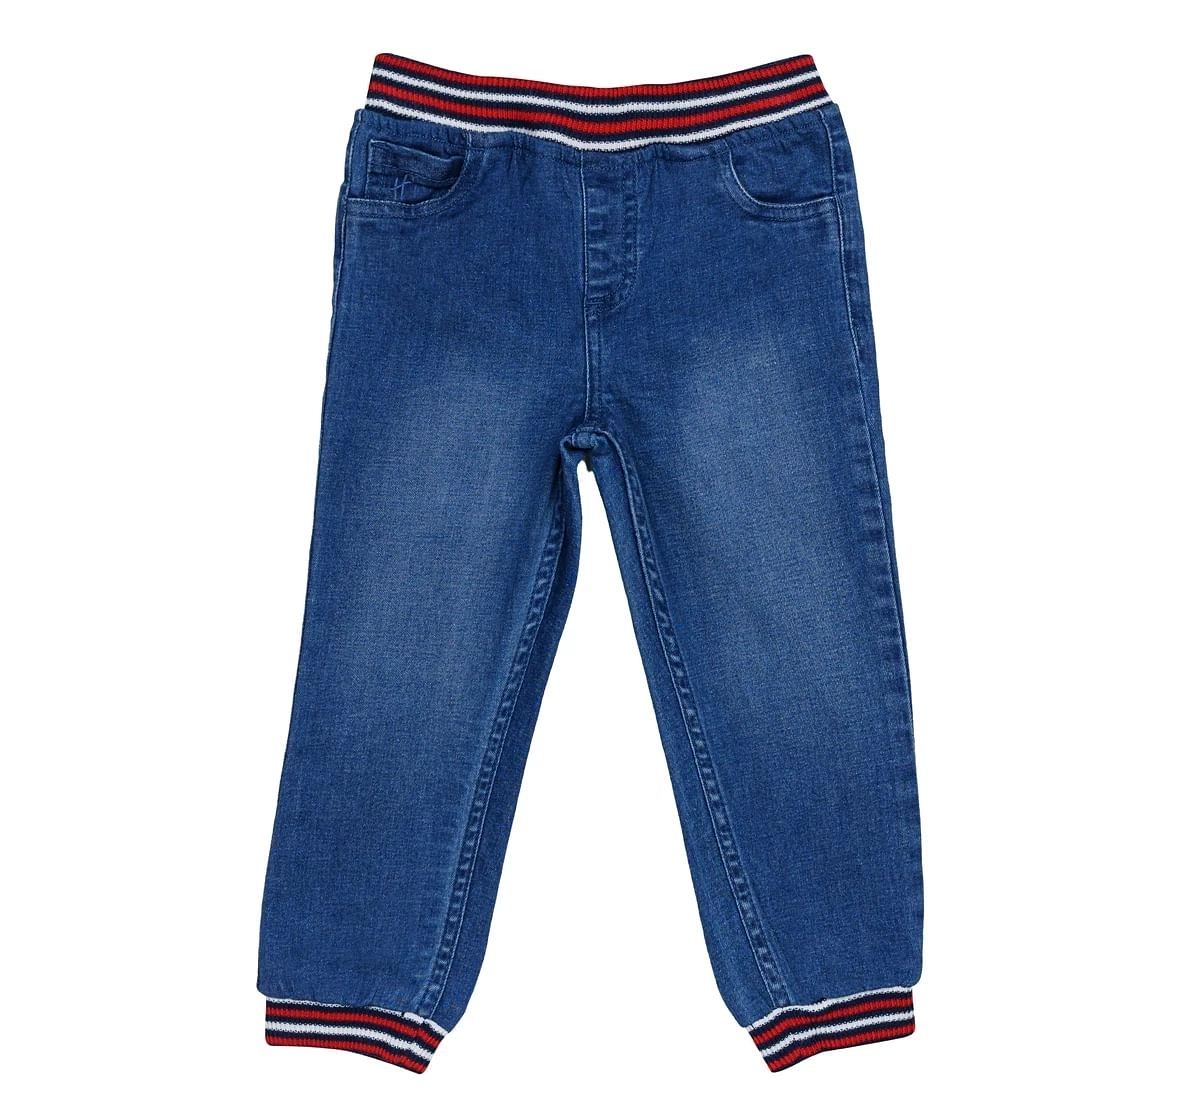 5.86US $ 20% OFF|Quality Boys Pants Children's Blue Jeans Daily Clothing  Casual Jeans For Boys Kids Baby Boy J… | Baby boy jeans, Boys denim jeans, Boys  jeans shirt